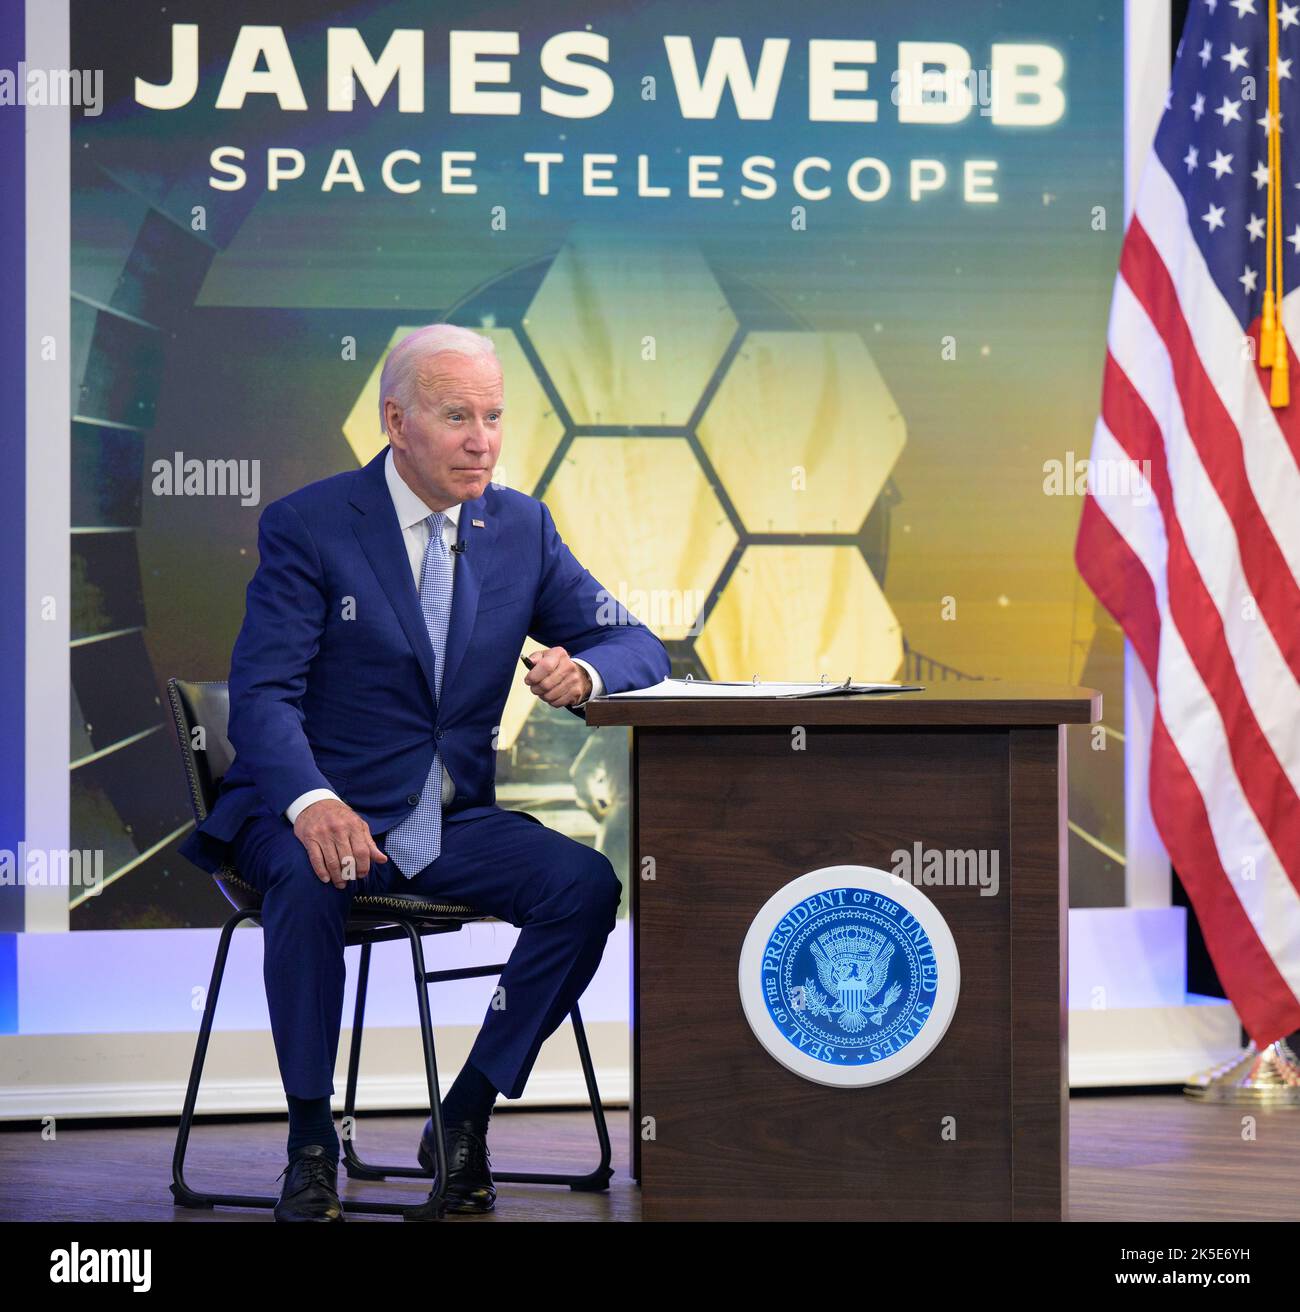 U.S. President Joe Biden talks with NASA Administrator Bill Nelson in a meeting where they previewed images from NASA’s James Webb Space Telescope, Monday, July 11, 2022, in the South Court Auditorium in the Eisenhower Executive Office Building on the White House complex in Washington. Stock Photo